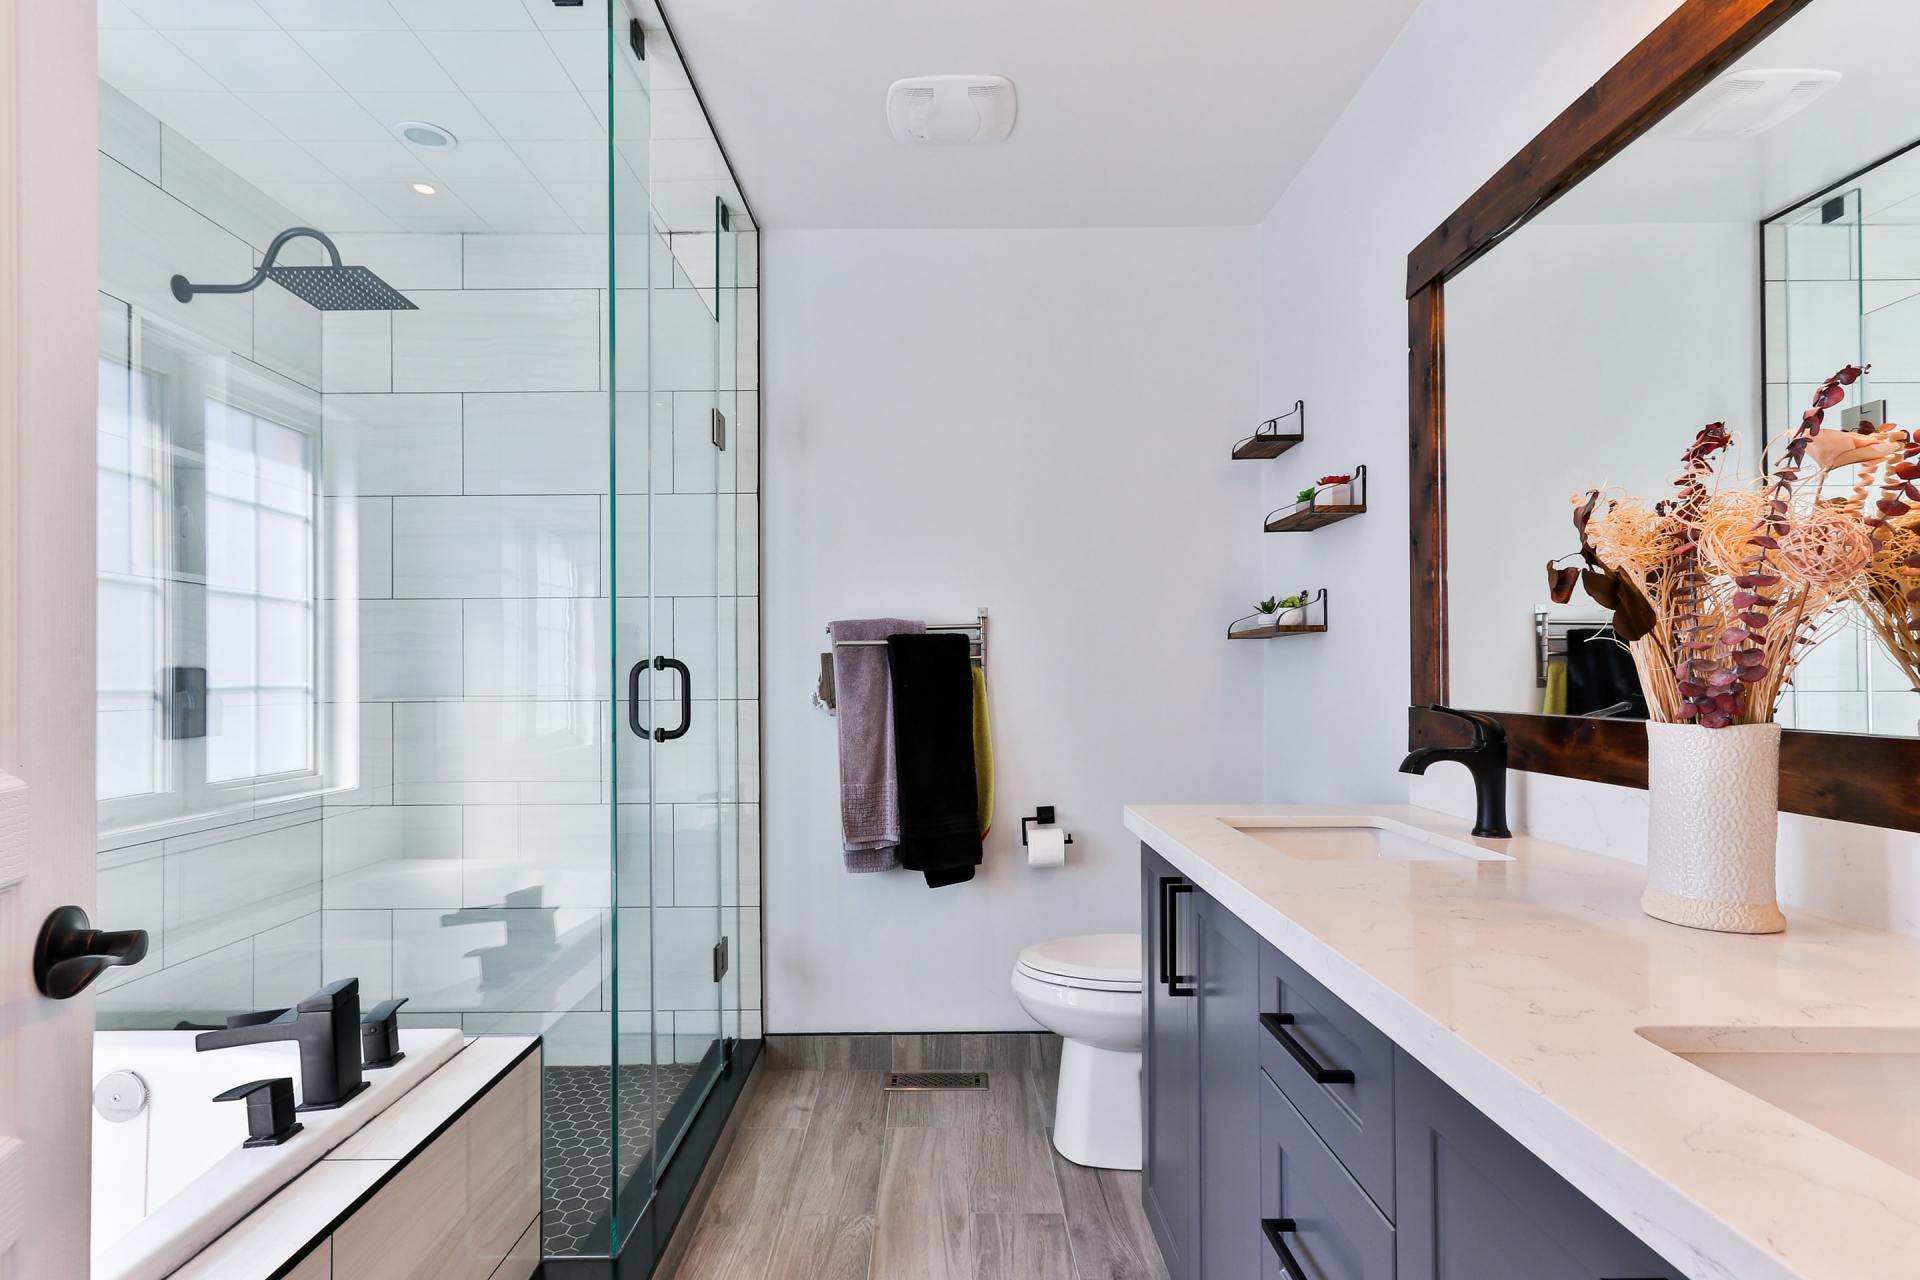 Bathroom Remodeling Services in Long Island NY